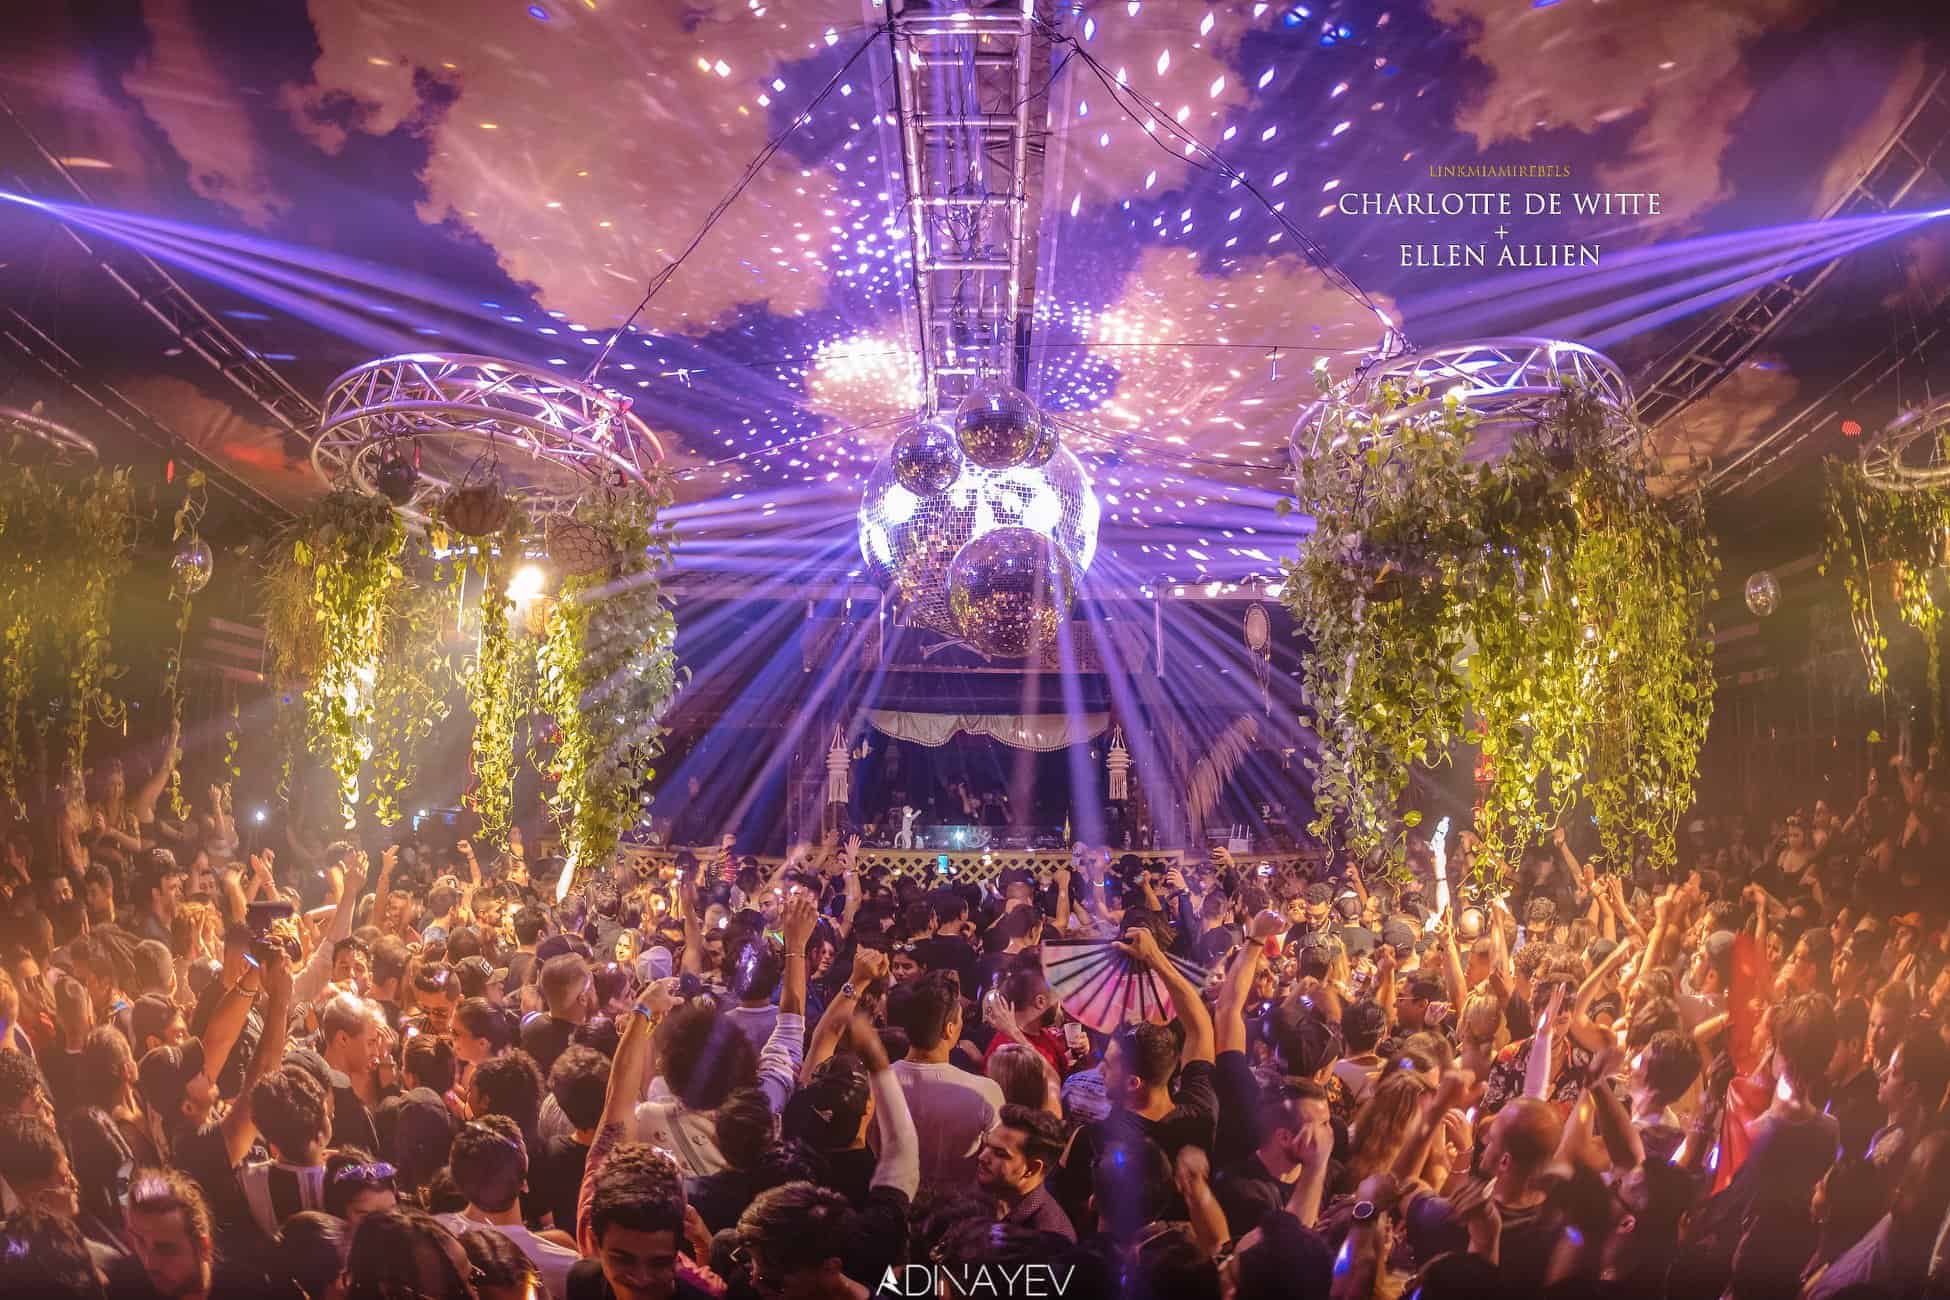 Club Space Miami Is Under New Ownership, Getting a New Look